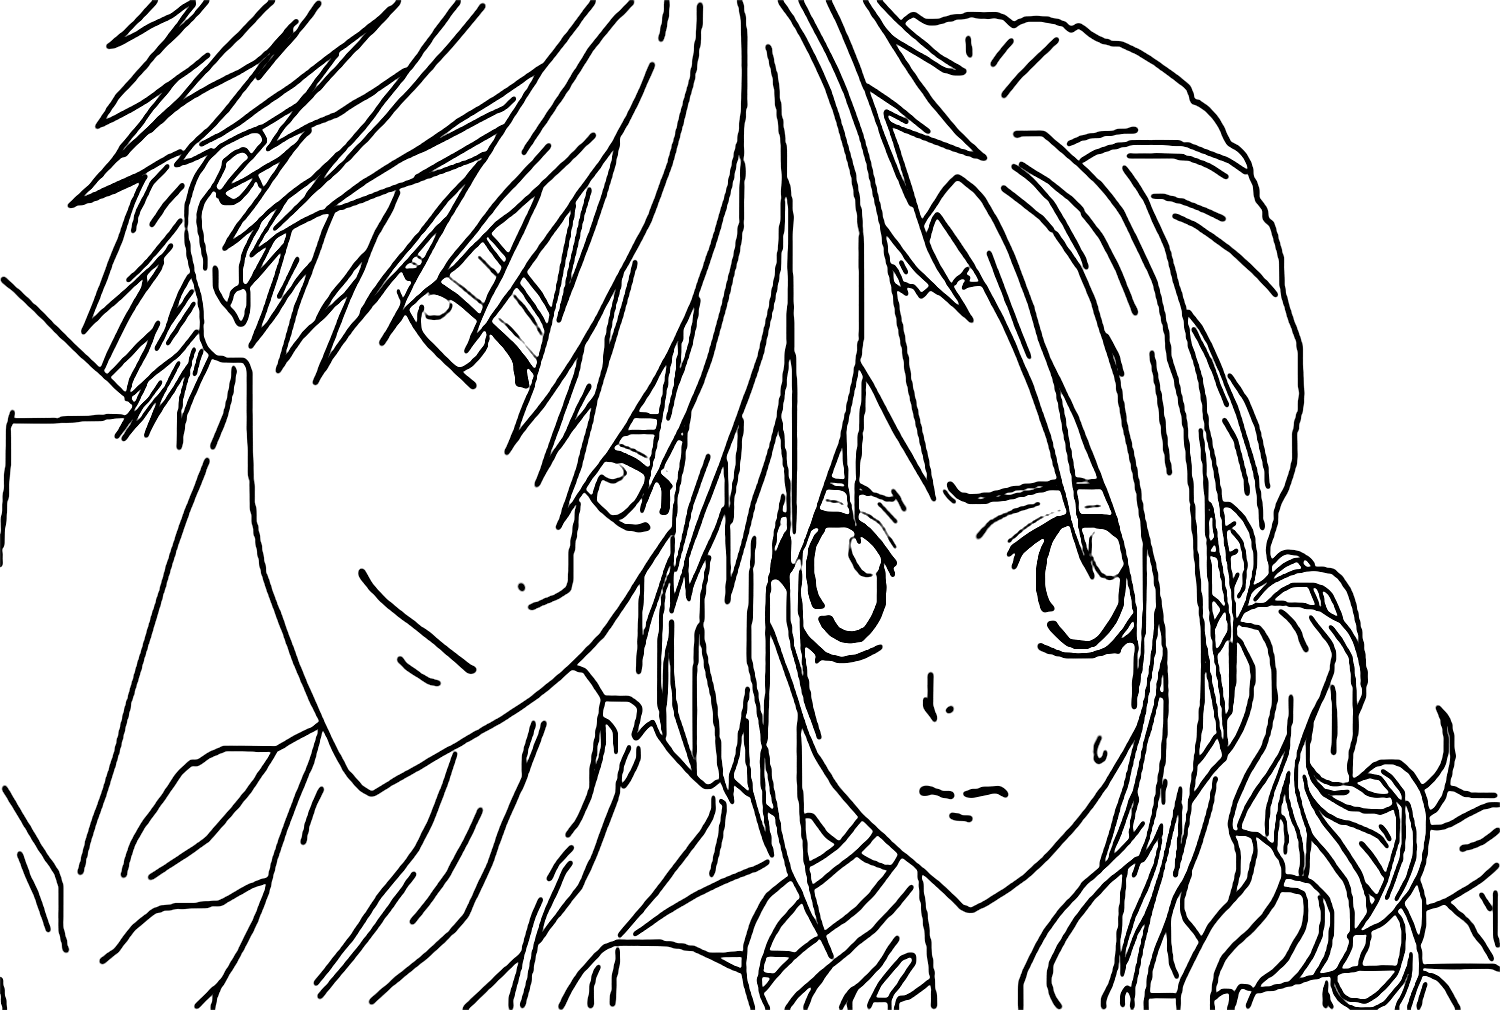 Usui and Misaki Coloring Page from Takumi Usui